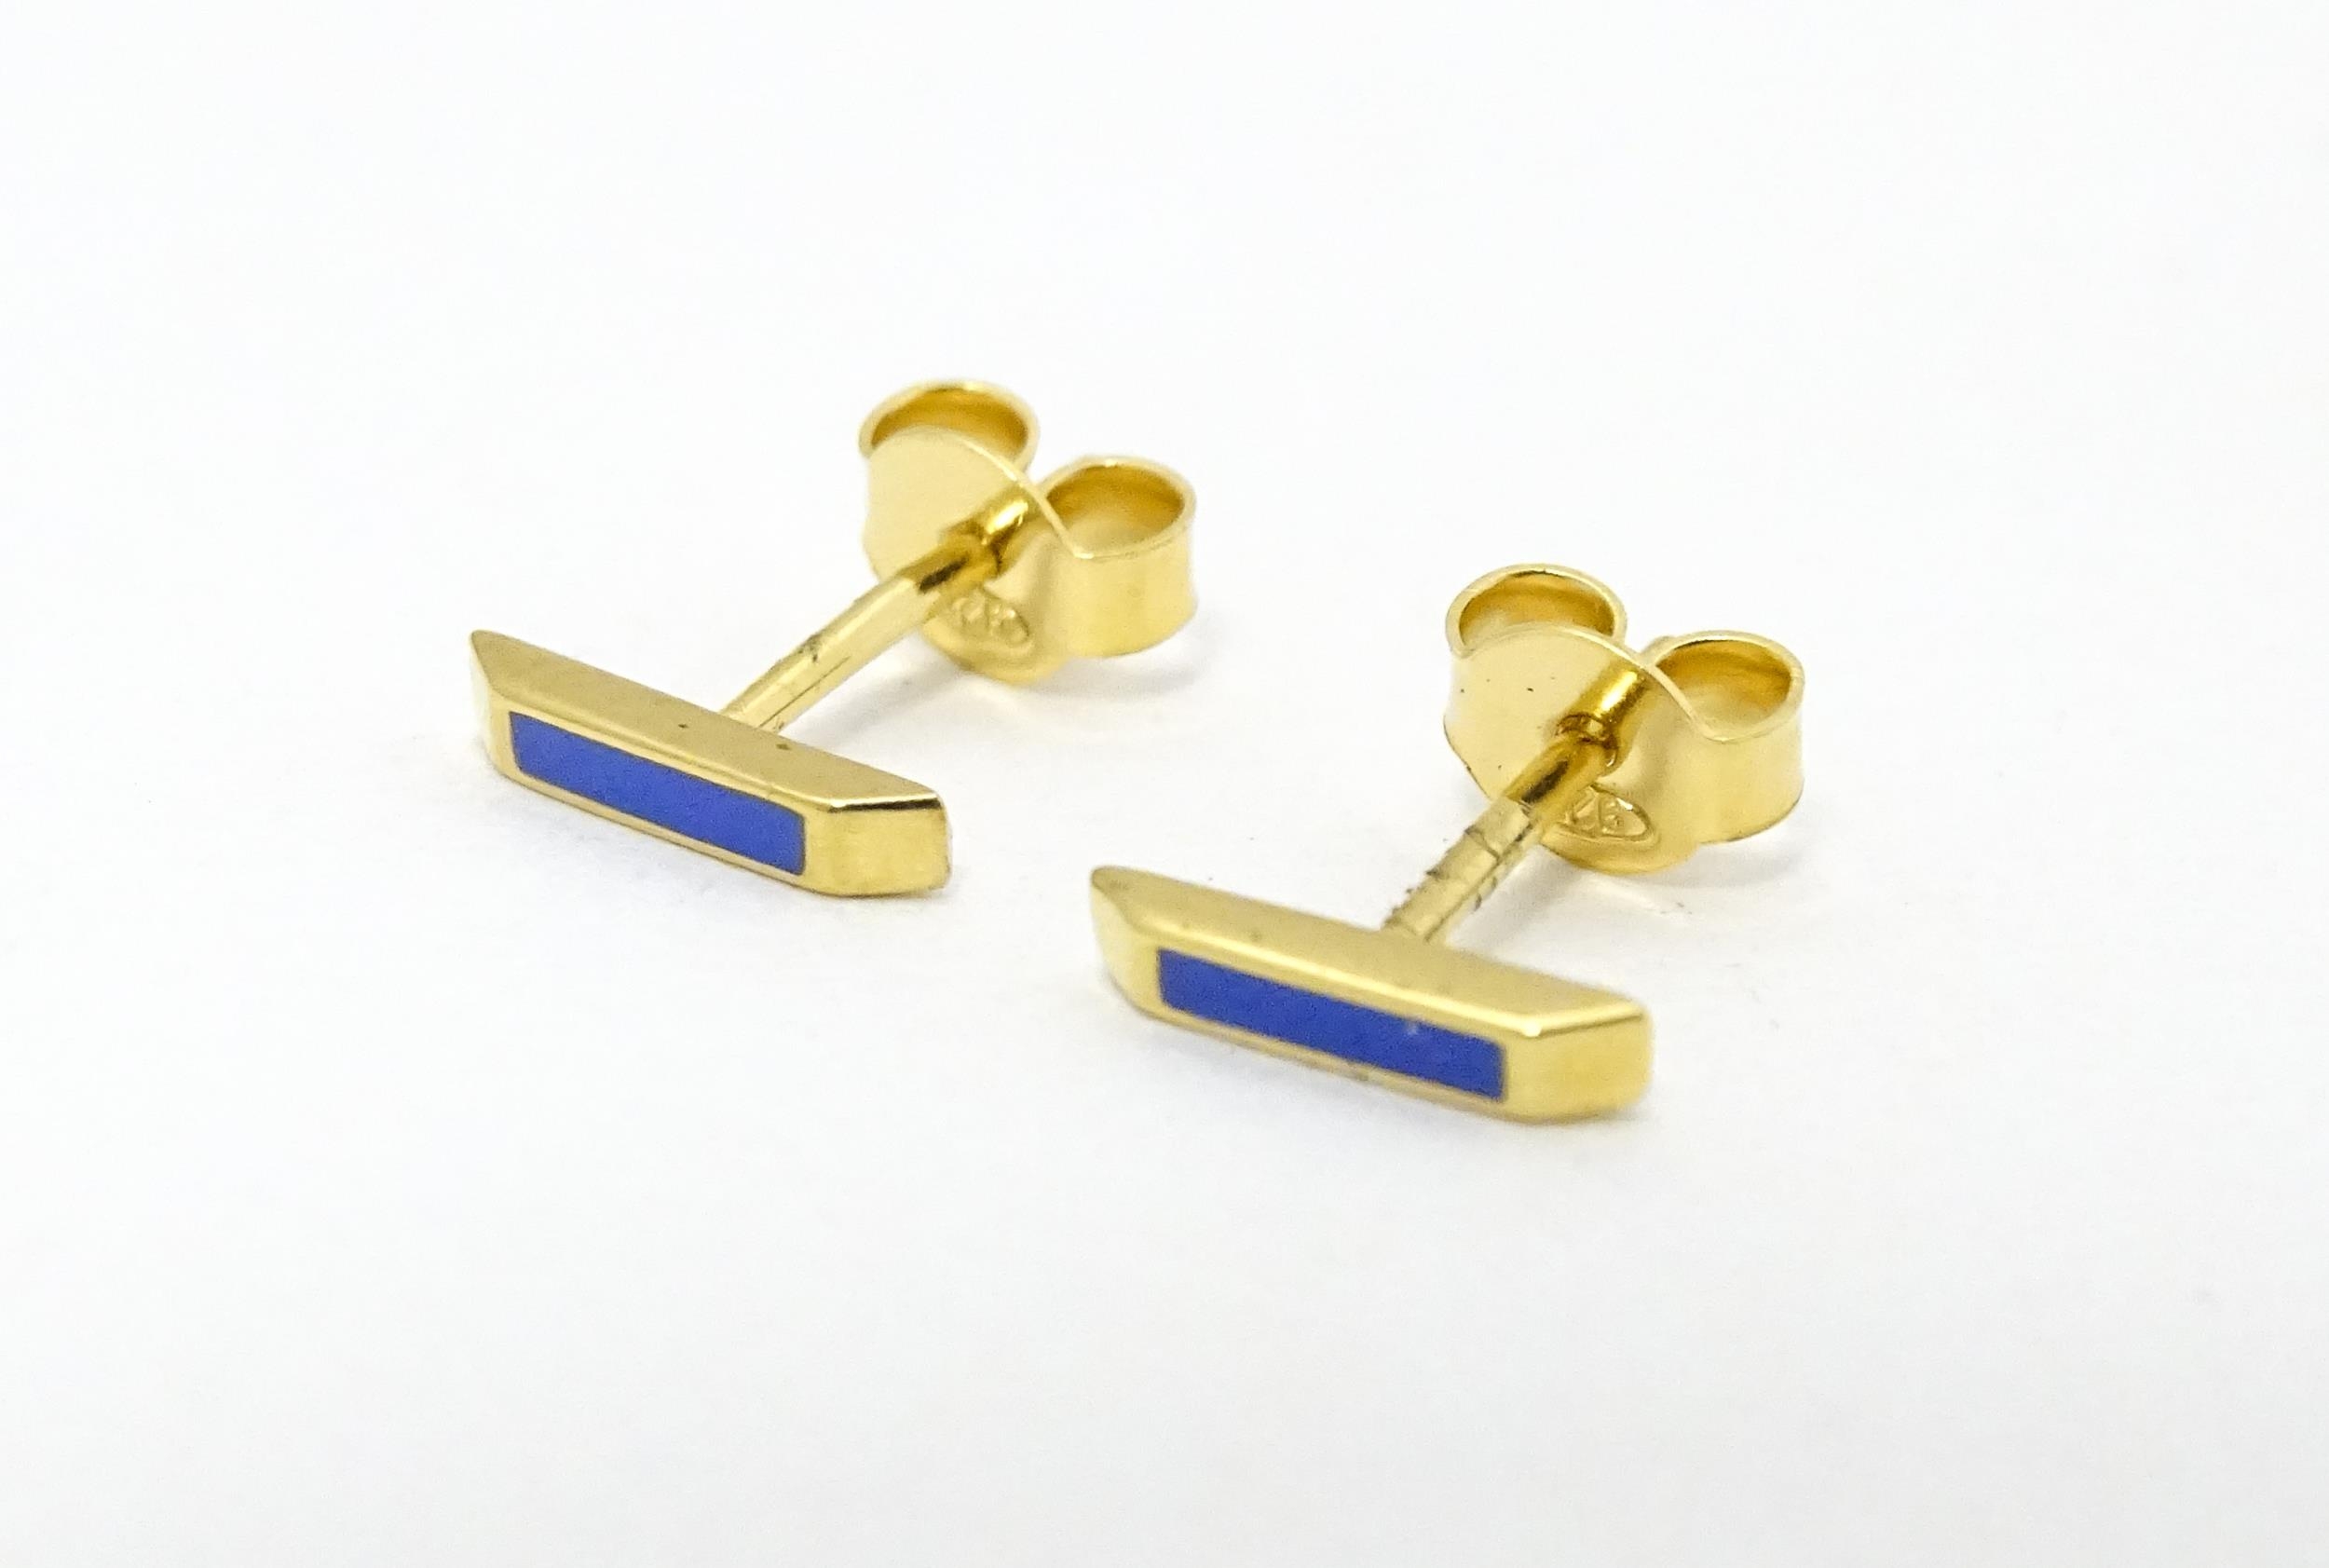 A pair of Astley Clarke 925 silver gilt stud earrings with blue enamel detail. Approx. 1/4" wide - Image 4 of 8